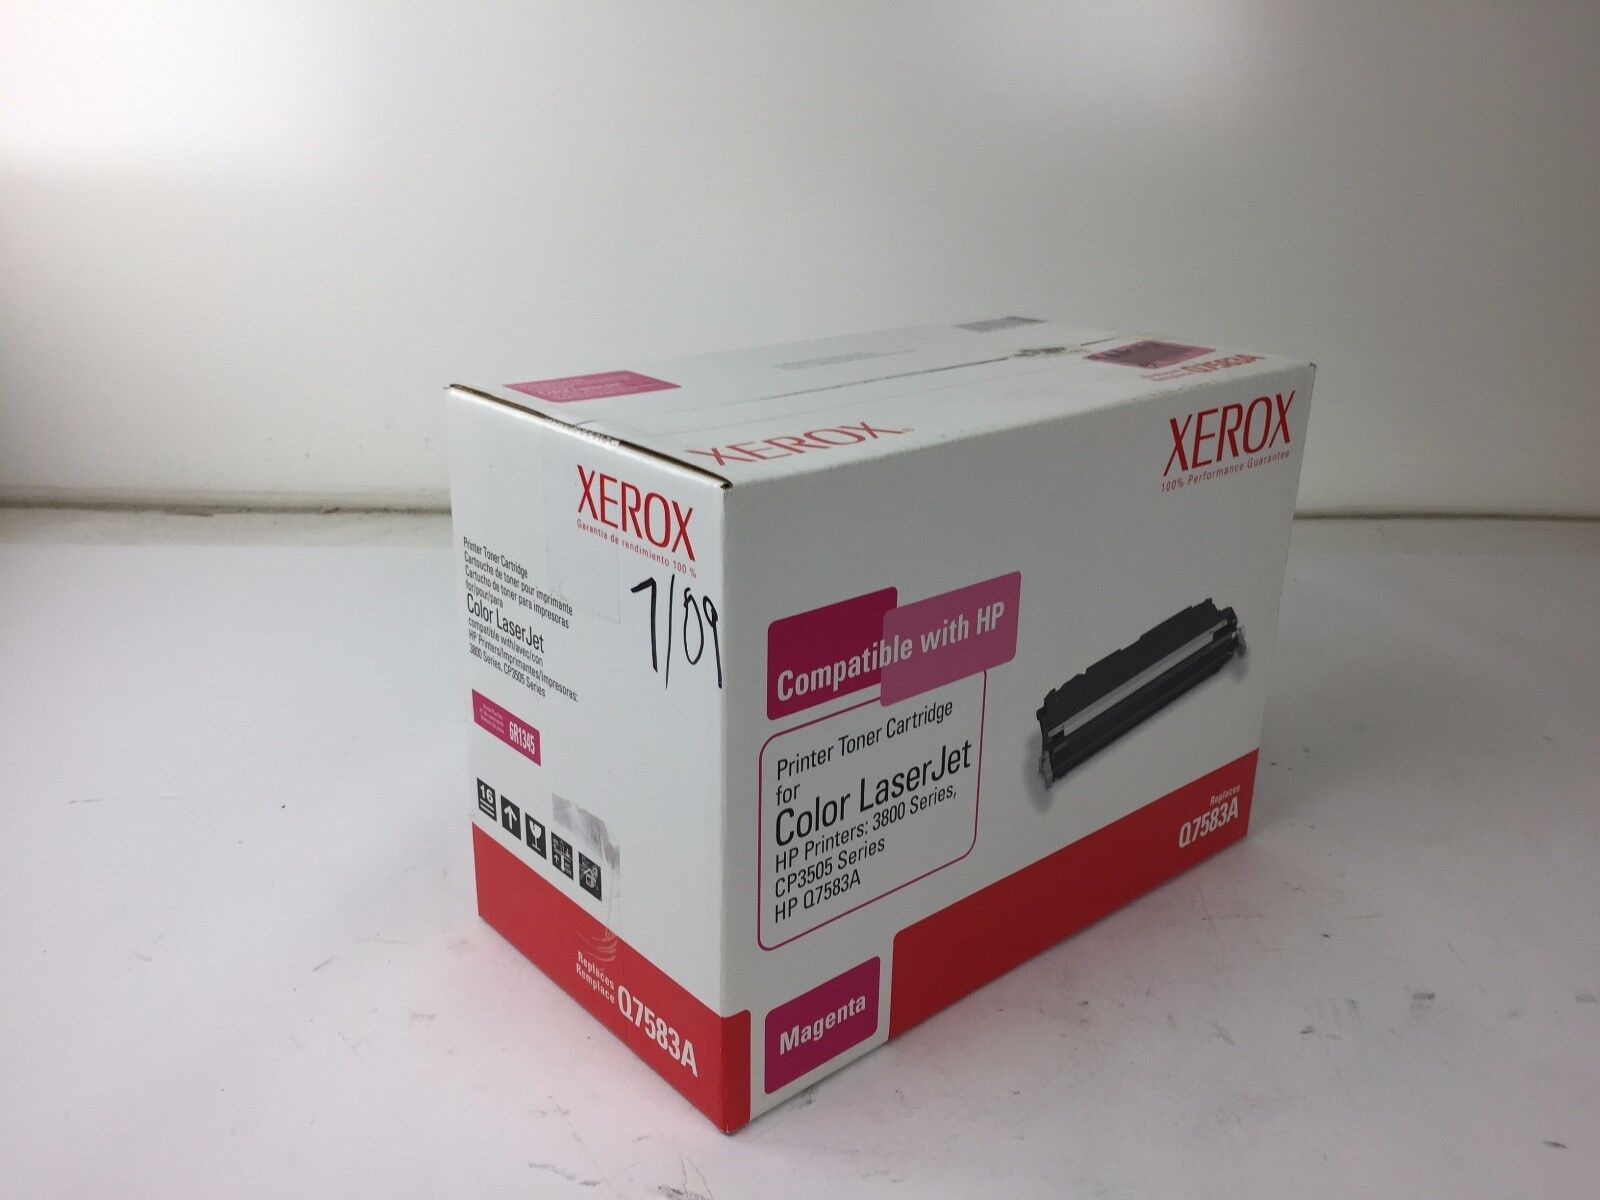 Xerox 6R1345 Magenta Toner Compatible with HP Q7583A for HP LaserJet 3800 CP3505